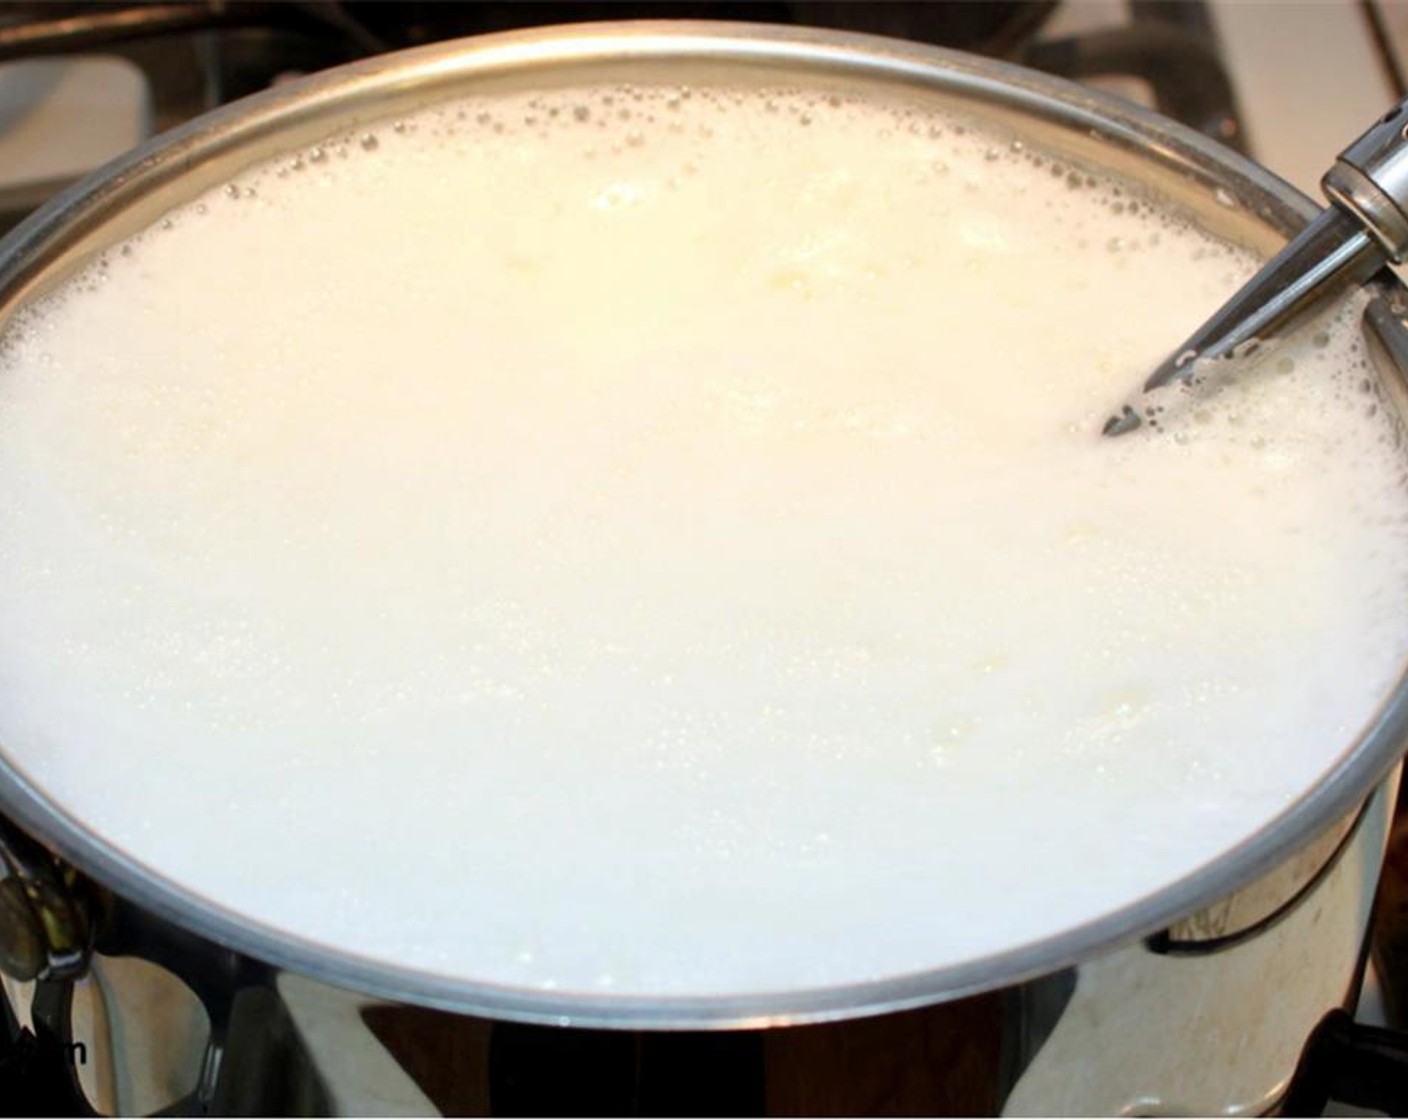 step 1 Bring the Milk (8 cups) to a boil, stirring occasionally so that it does not stick to the bottom of the vessel. Once it boils turn the stove off.